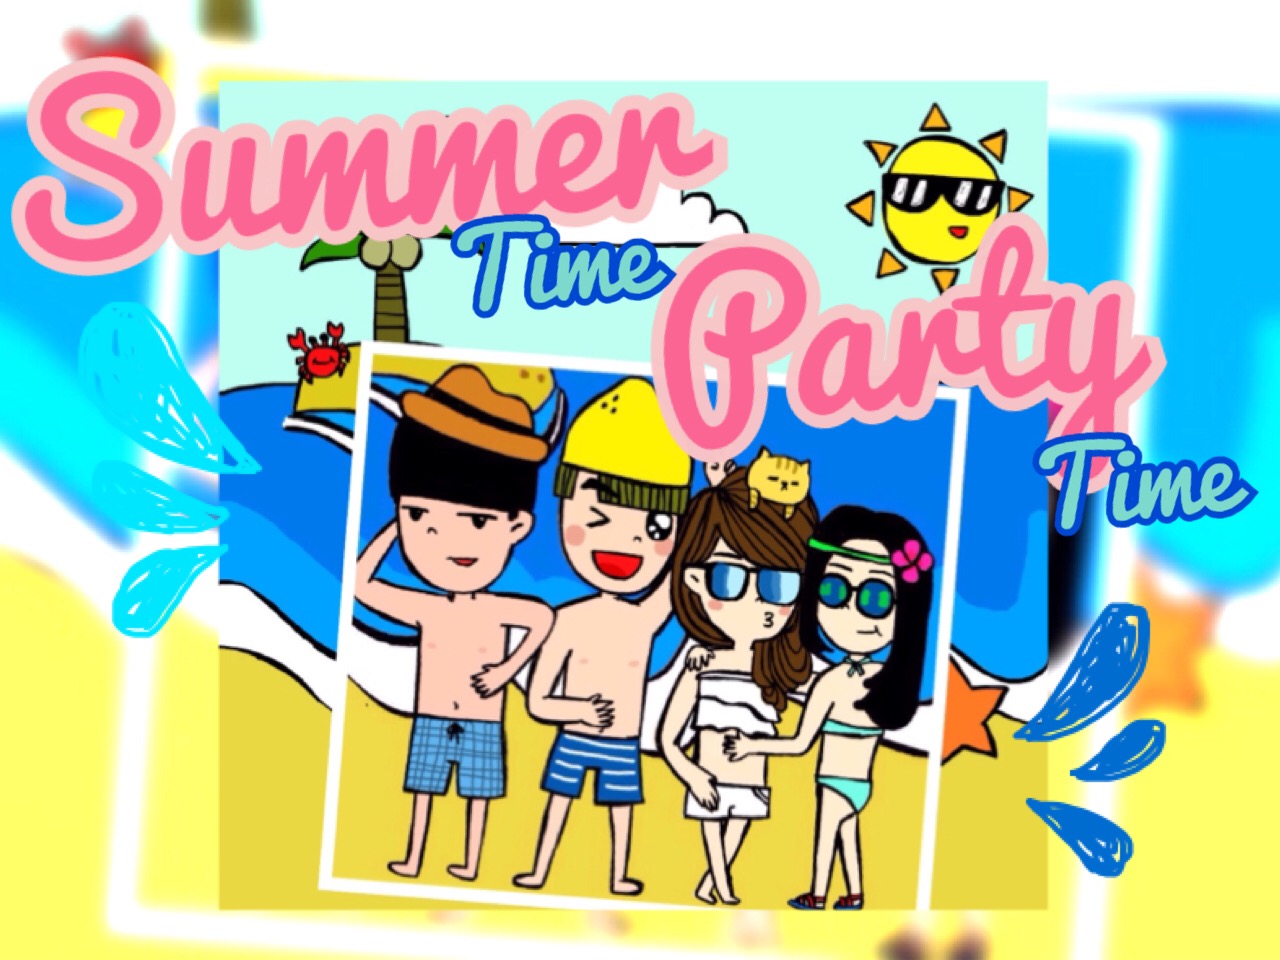 Summer Time! Party Time!